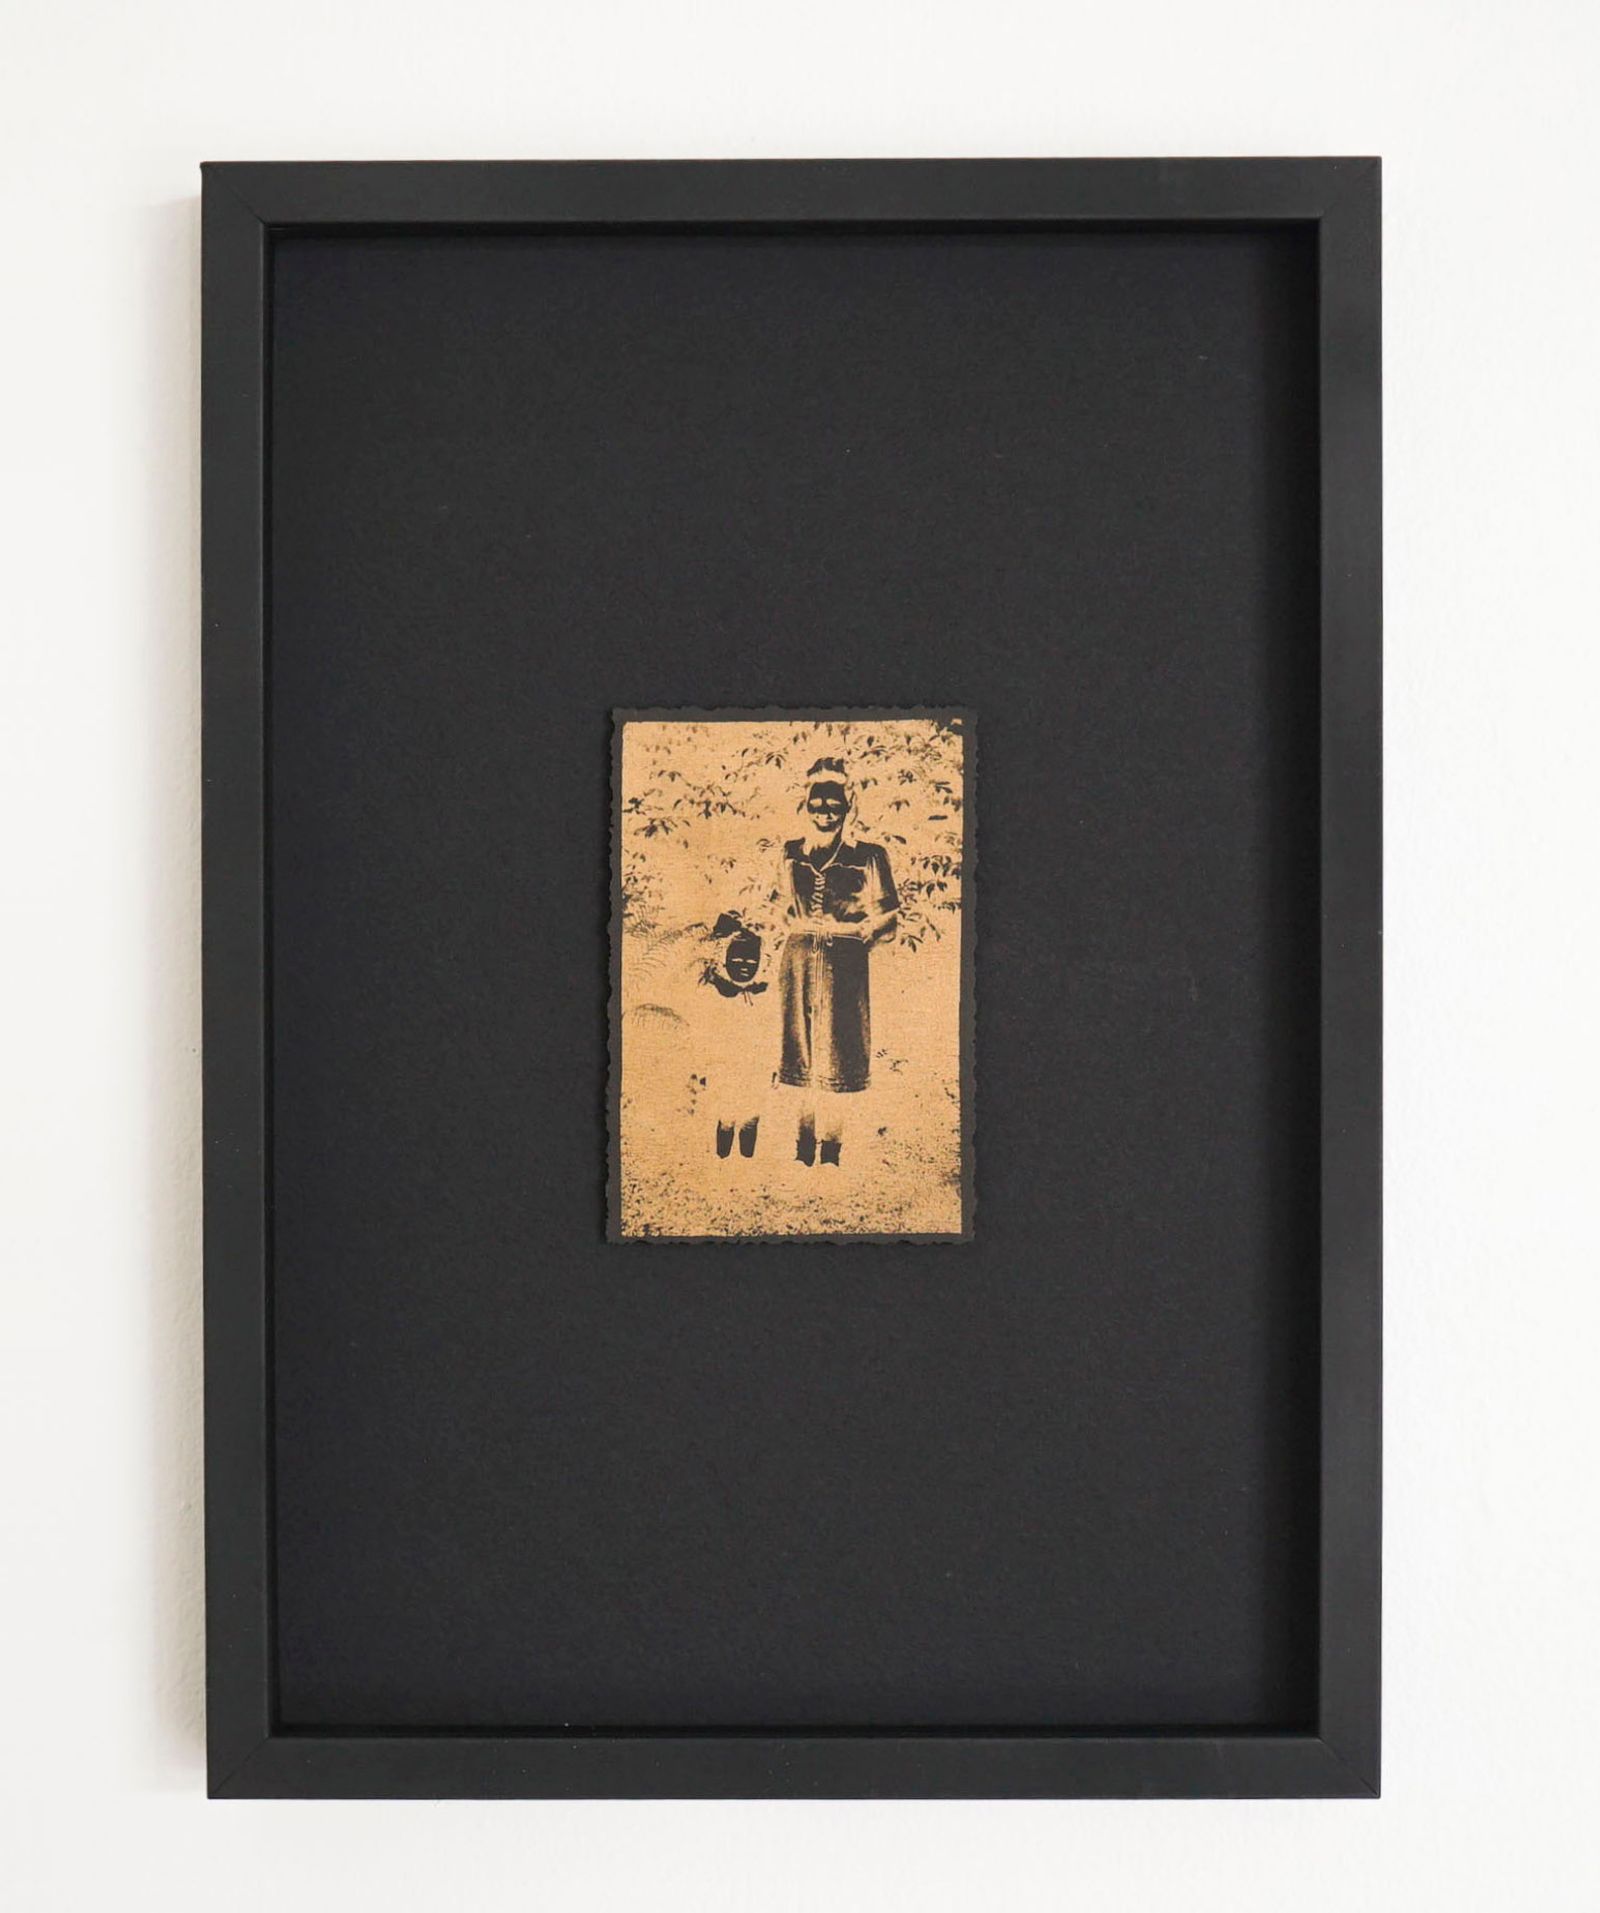 © Tomasz Laczny - Riso print, golden ink , 10x6cm (without frame), on black 60g Hahnemuhle paper